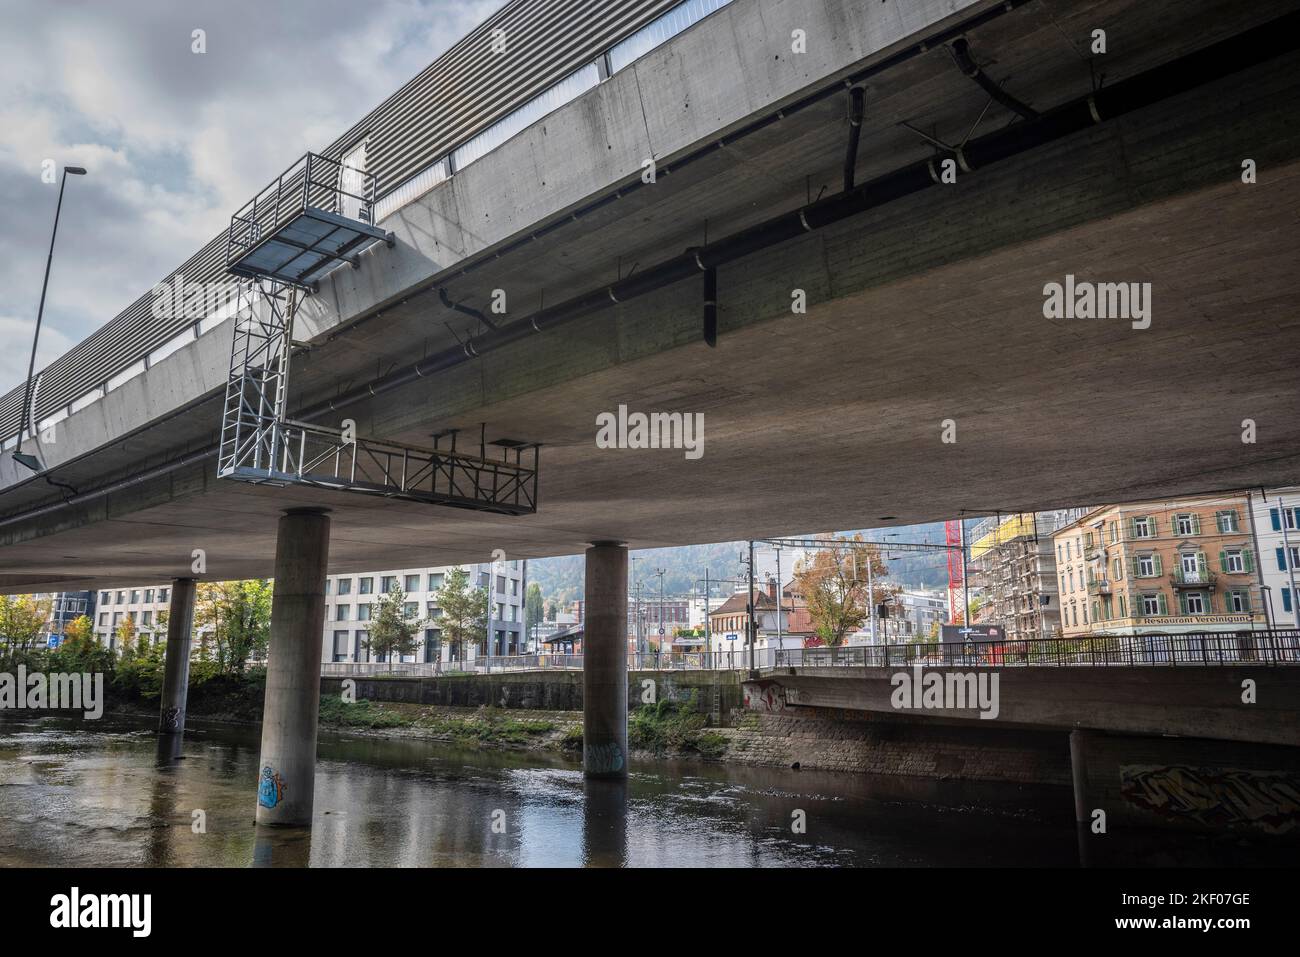 A dual carriageway following directly overhead the River Sihl, Zurich, Switzerland Stock Photo